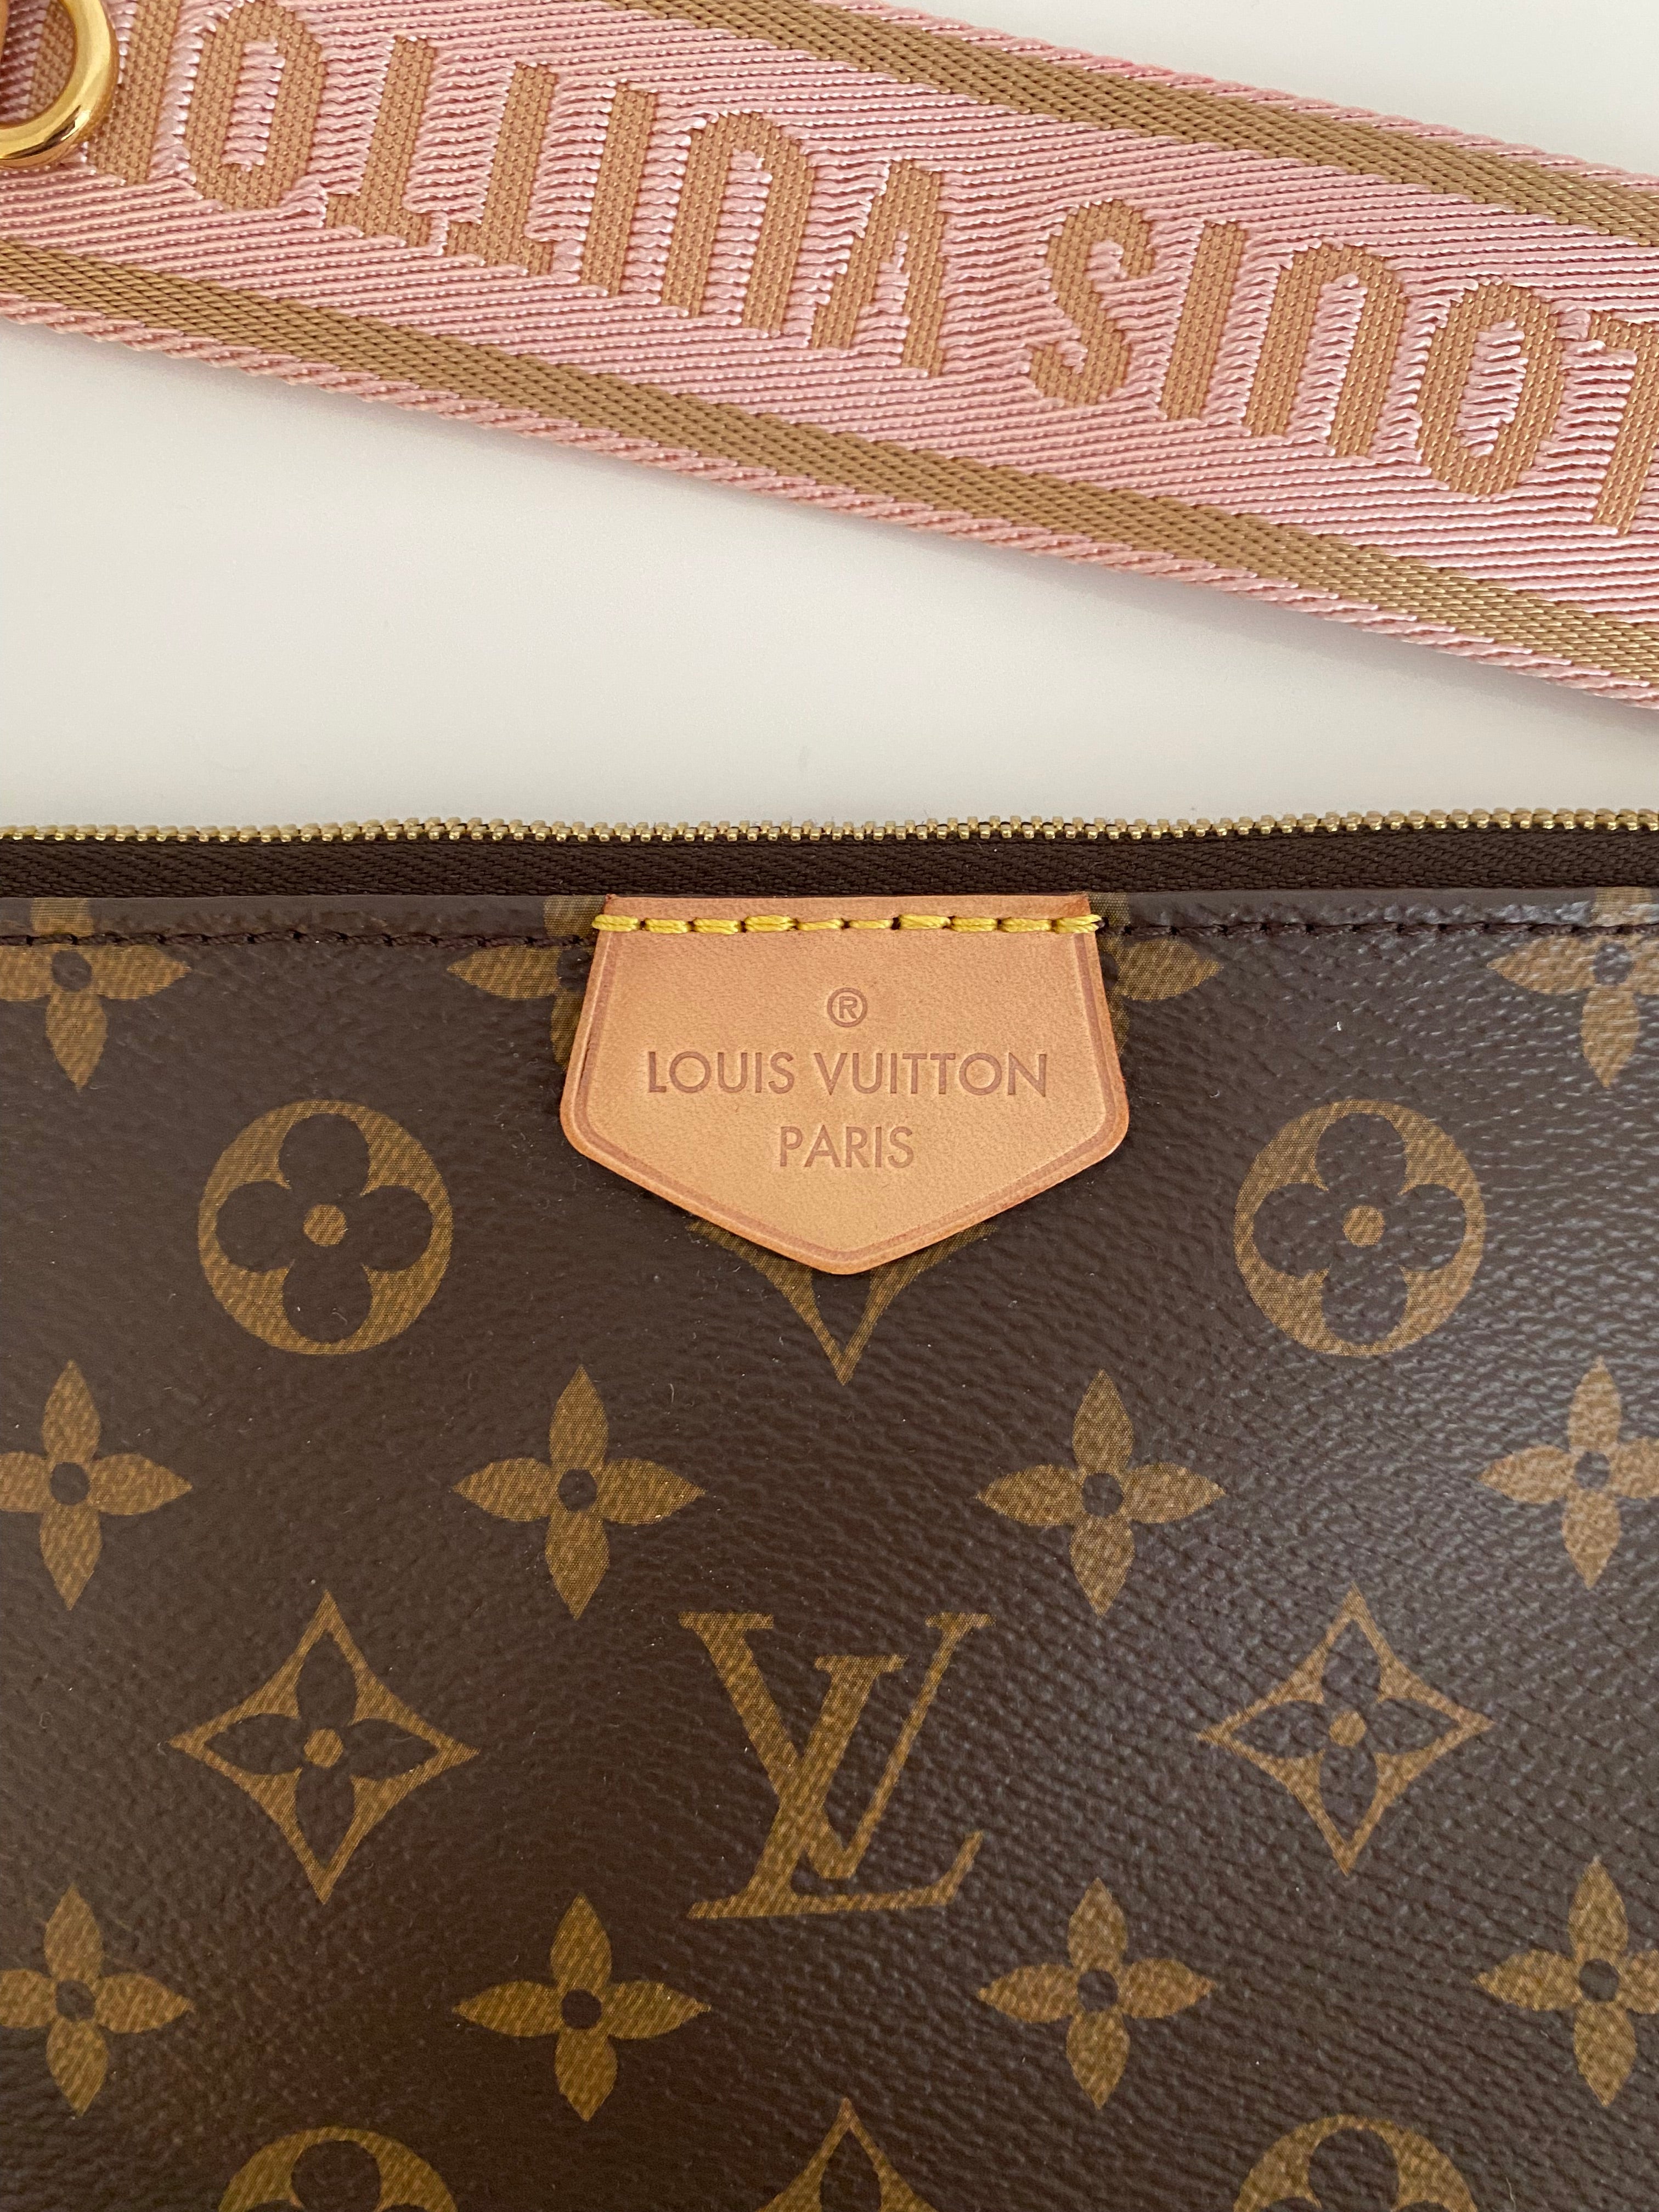 My first exotic from LV! : r/Louisvuitton